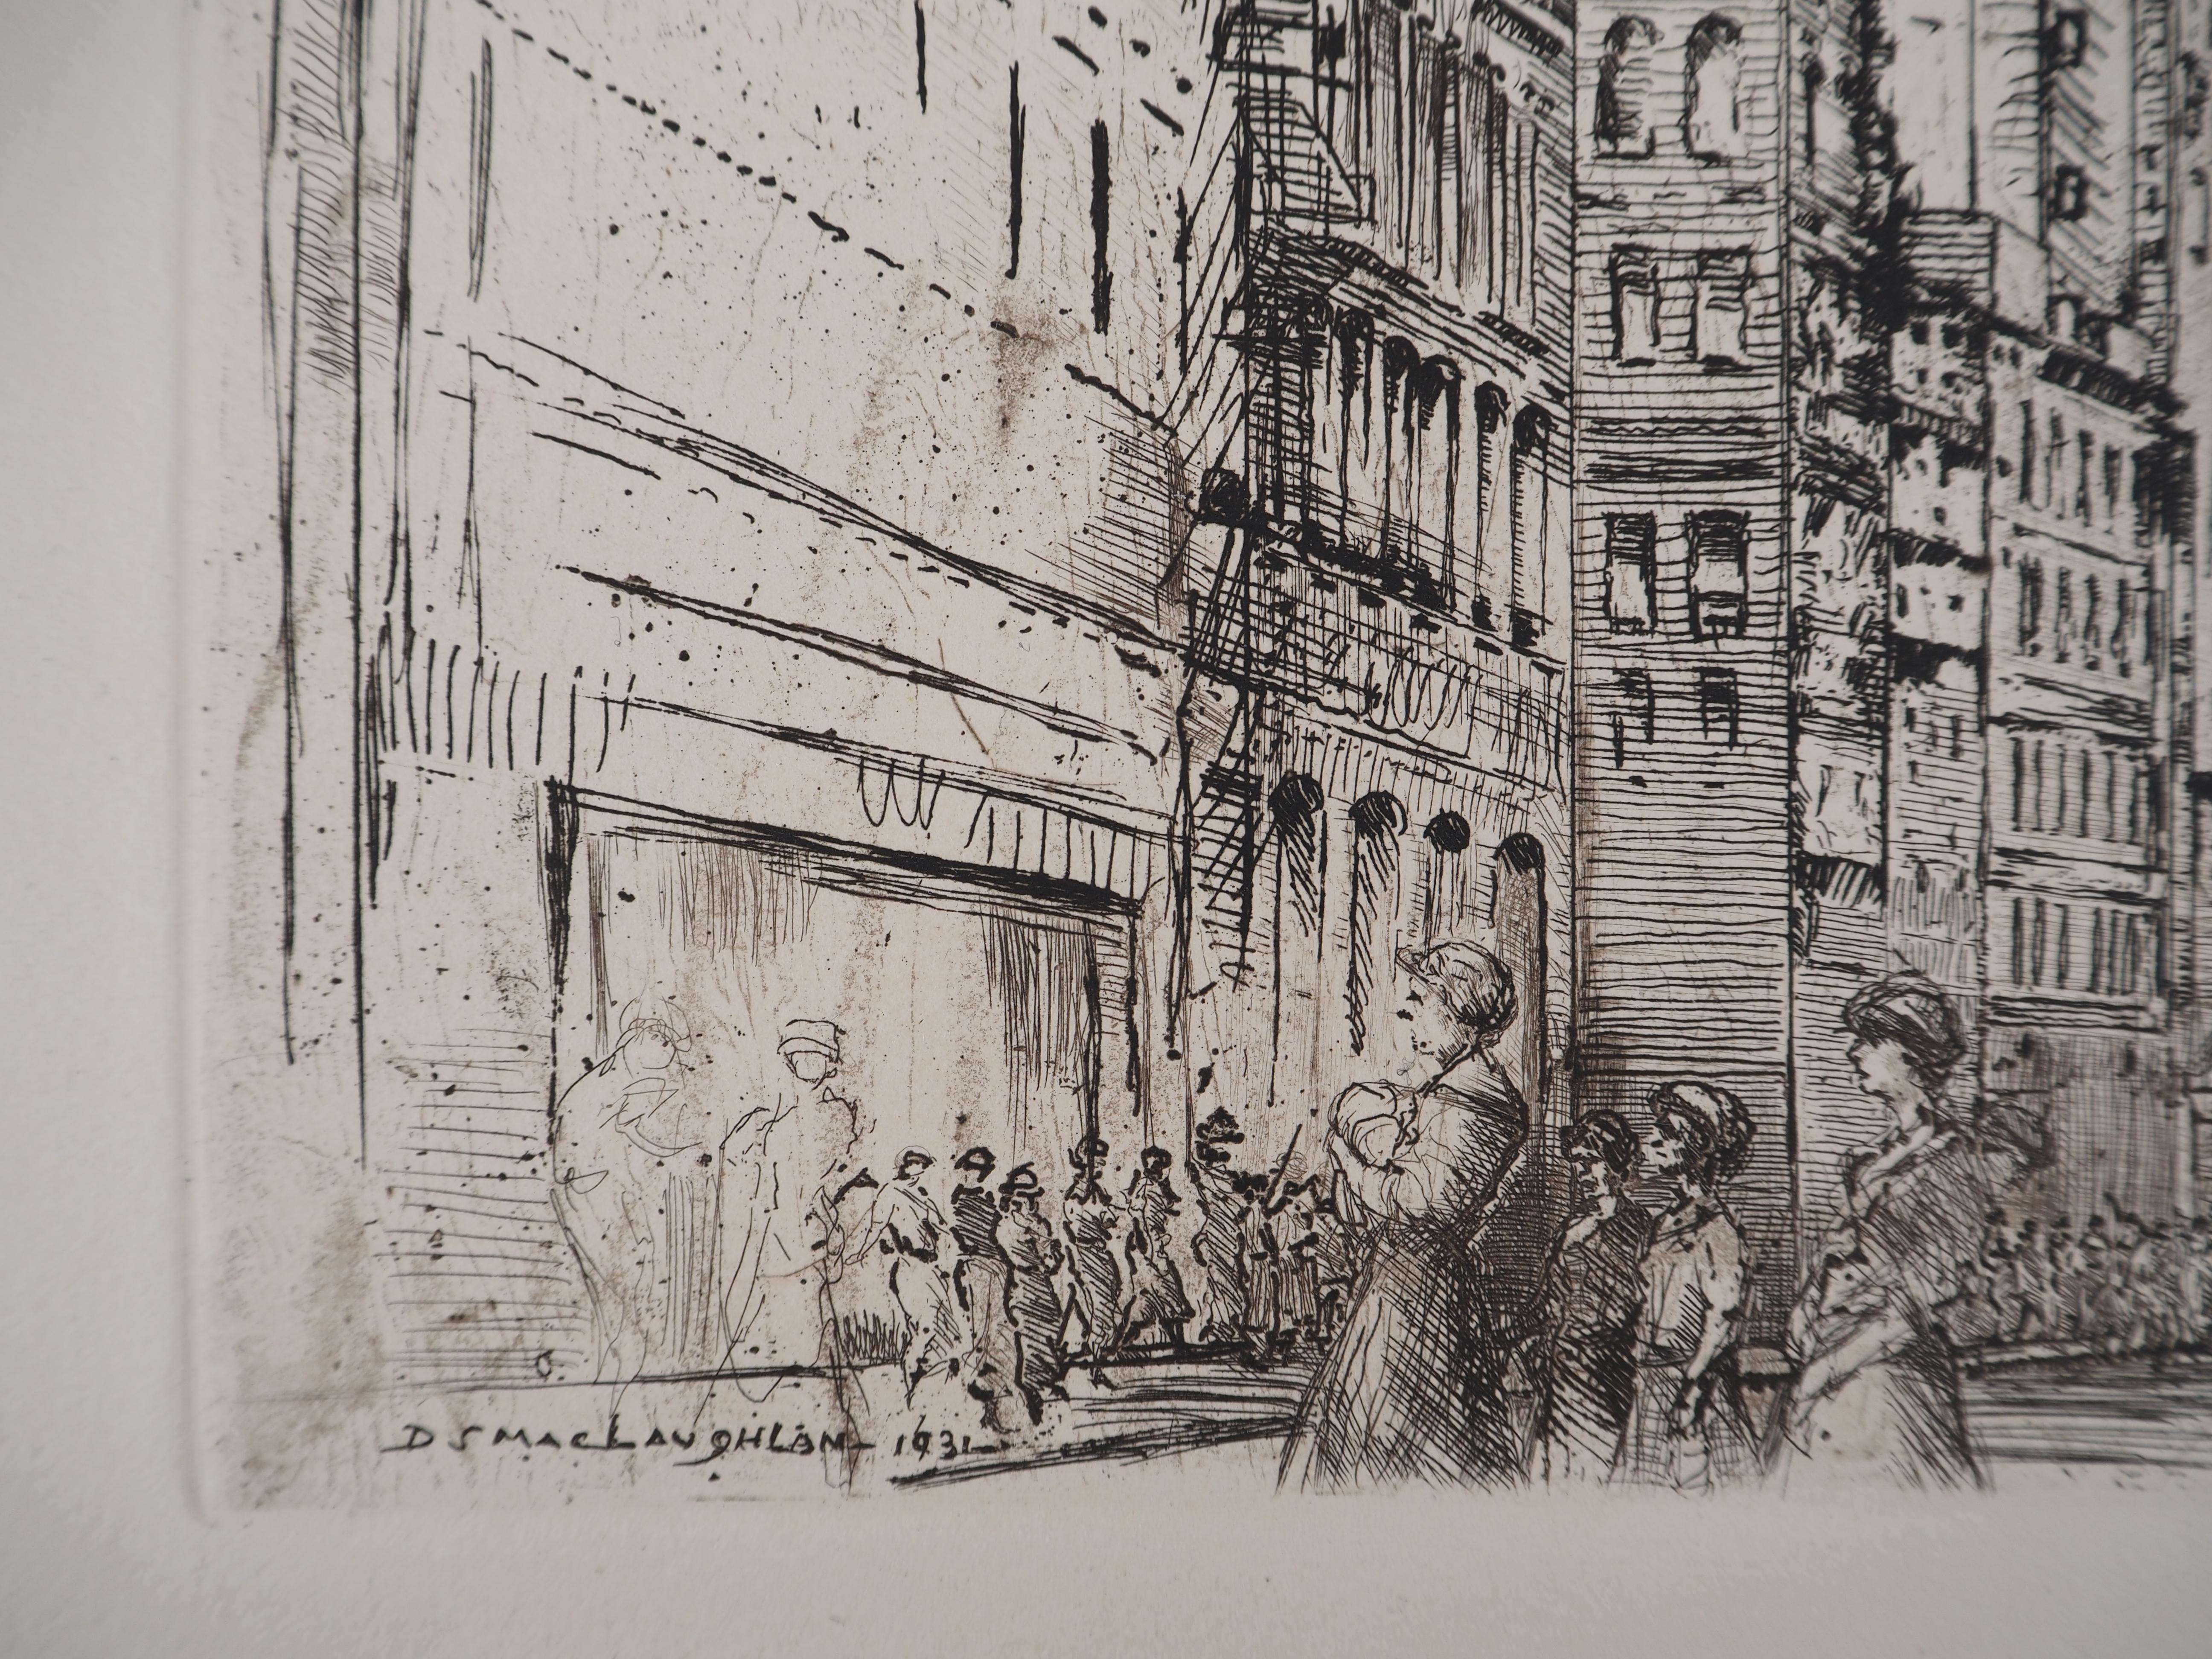 Chicago, Animated Avenue - Original etching, c. 1931 - Print by Donald Shaw MacLaughlan